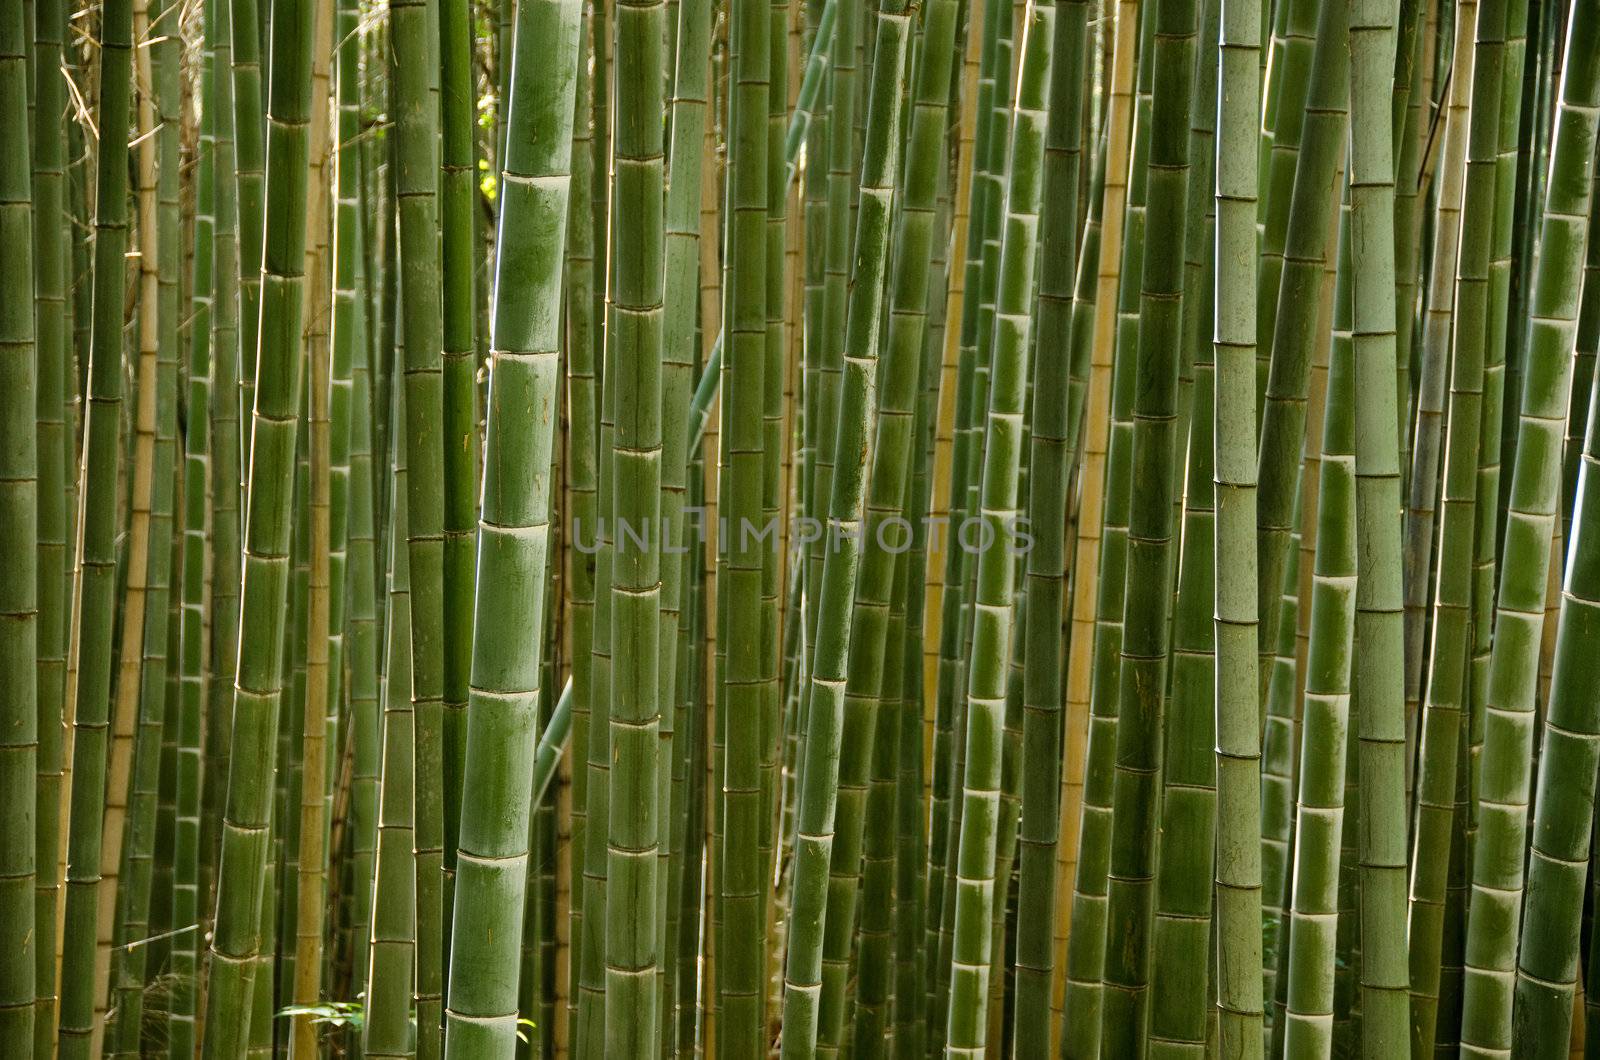 Stems of a bamboo forest by Arrxxx